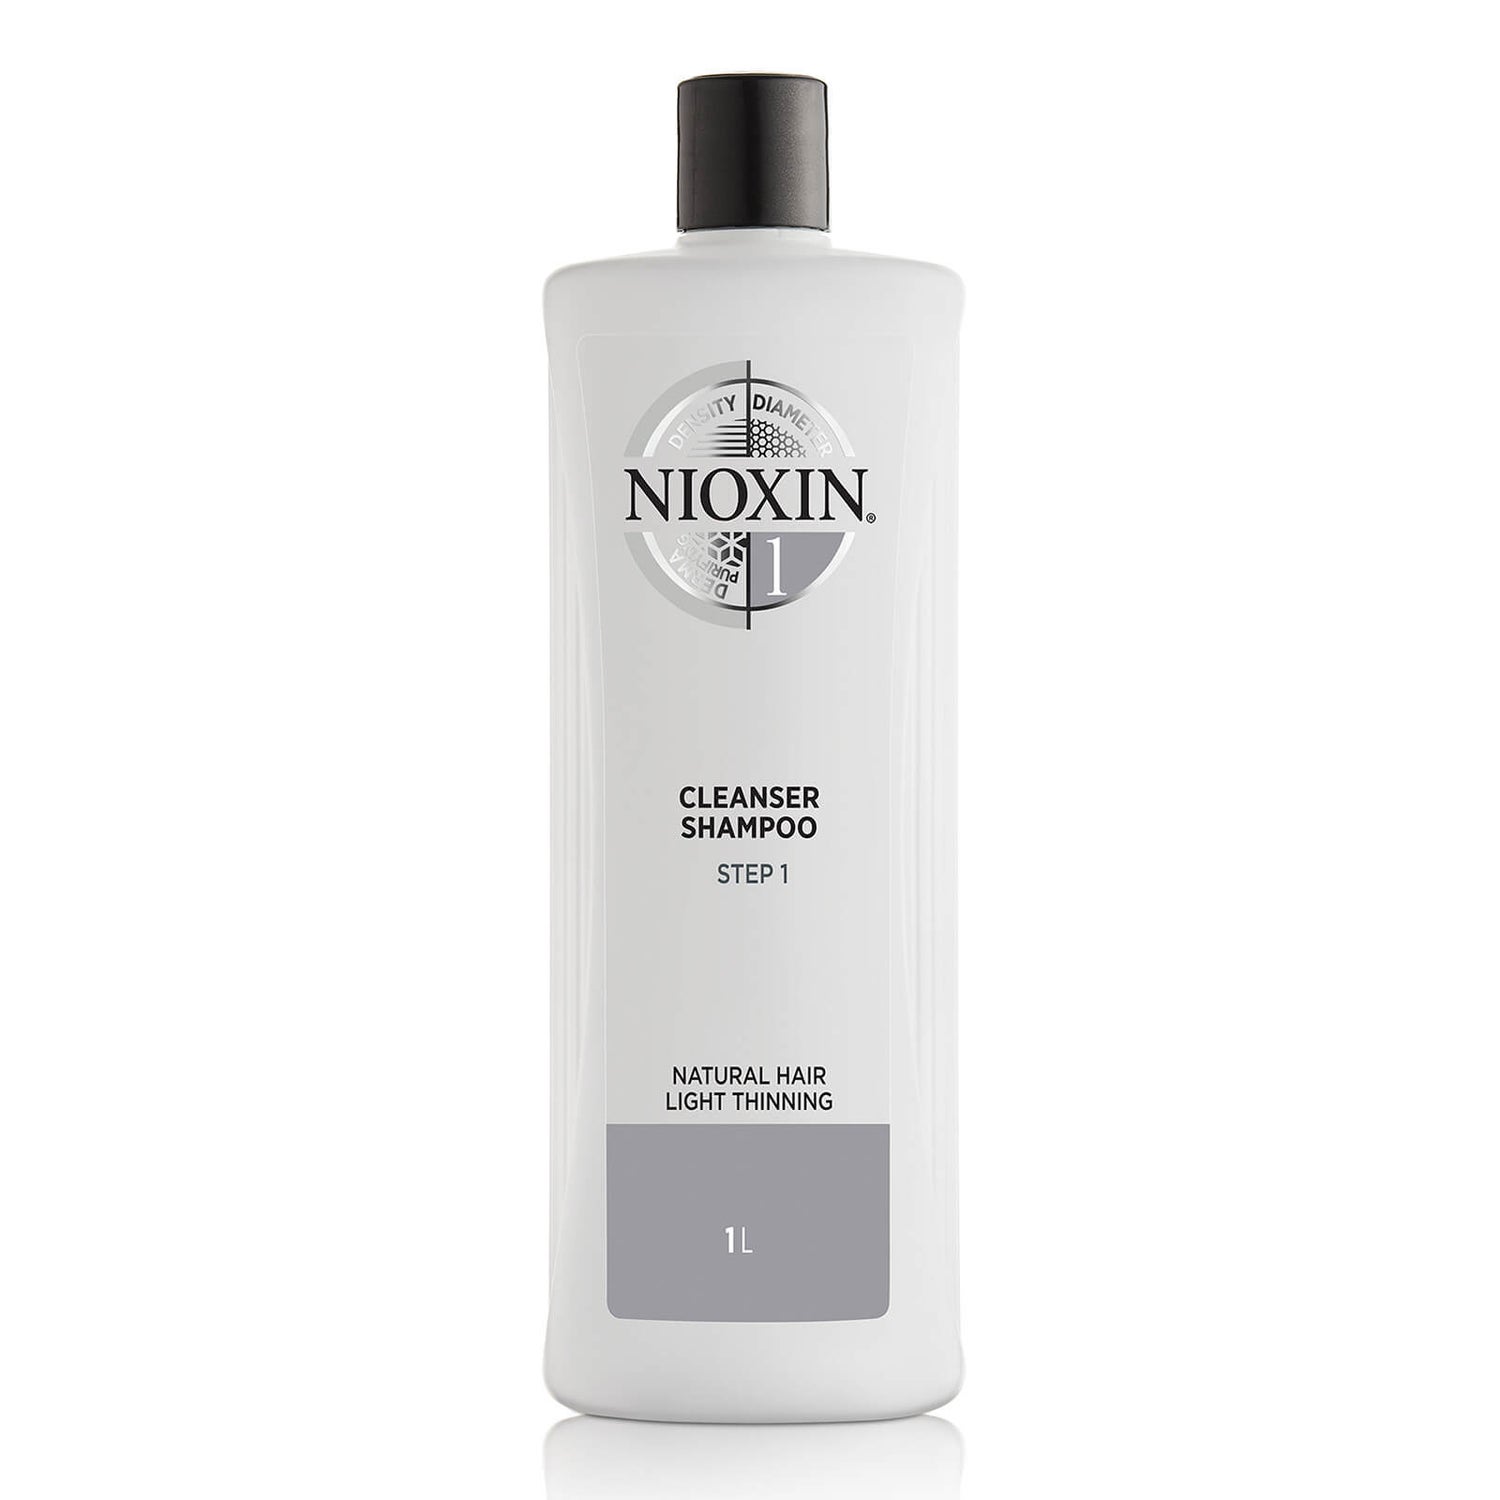 NIOXIN 3-Part System 1 Cleanser Shampoo for Natural Hair with Light Thinning 1000 ml